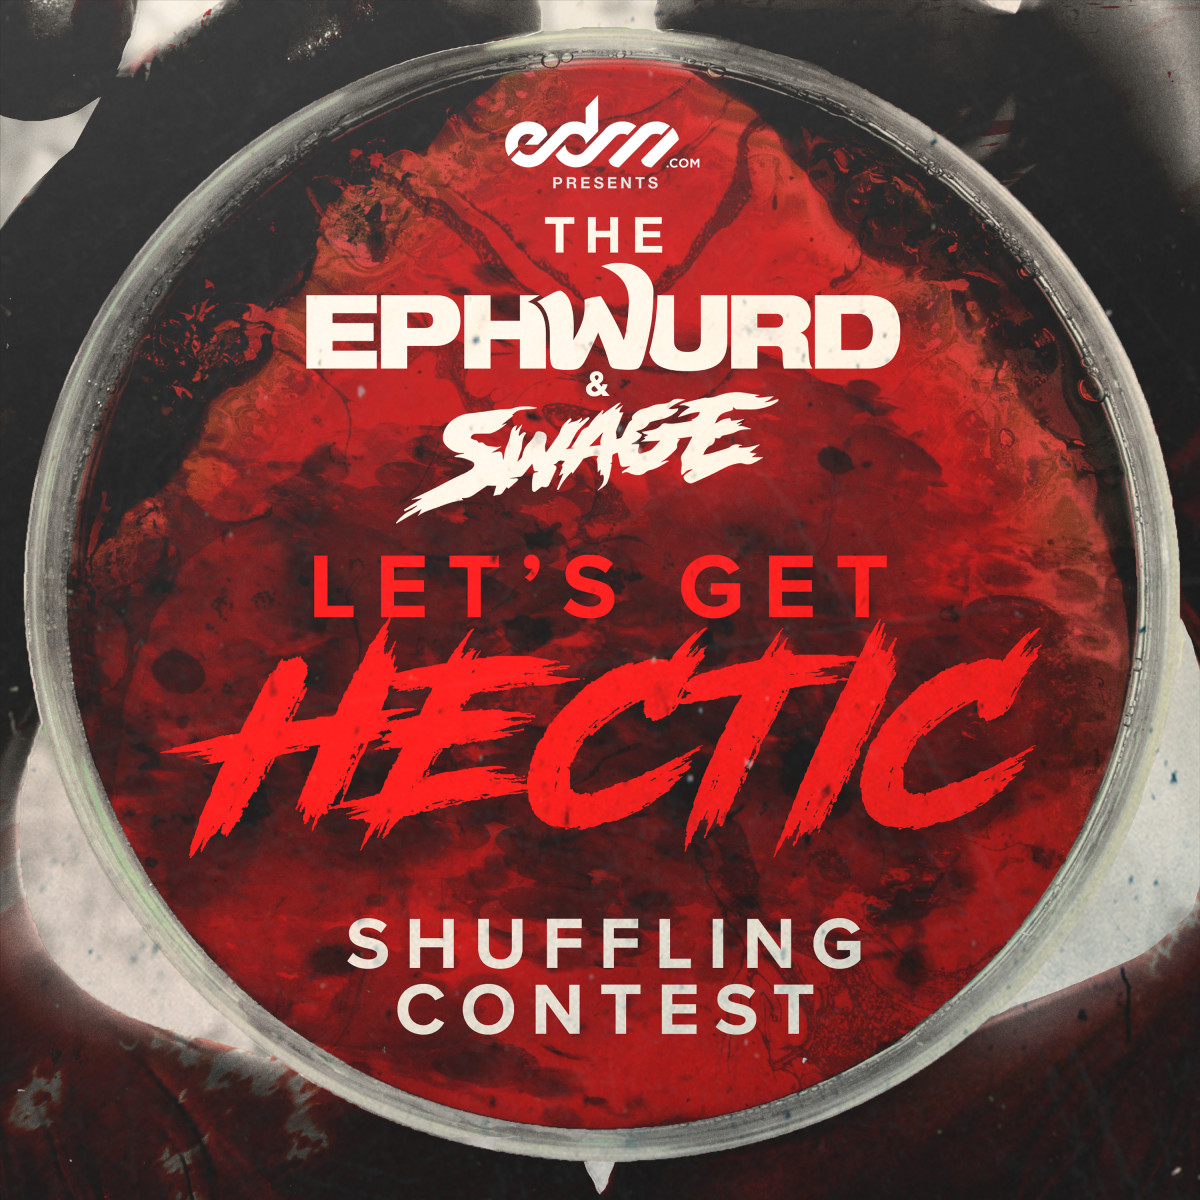 EPHWURD & SWAGE - "Hectic" -- EDM.com Presents "Lets Get Hectic" Shuffling Contest (Dance UGC Content / Shufflers)